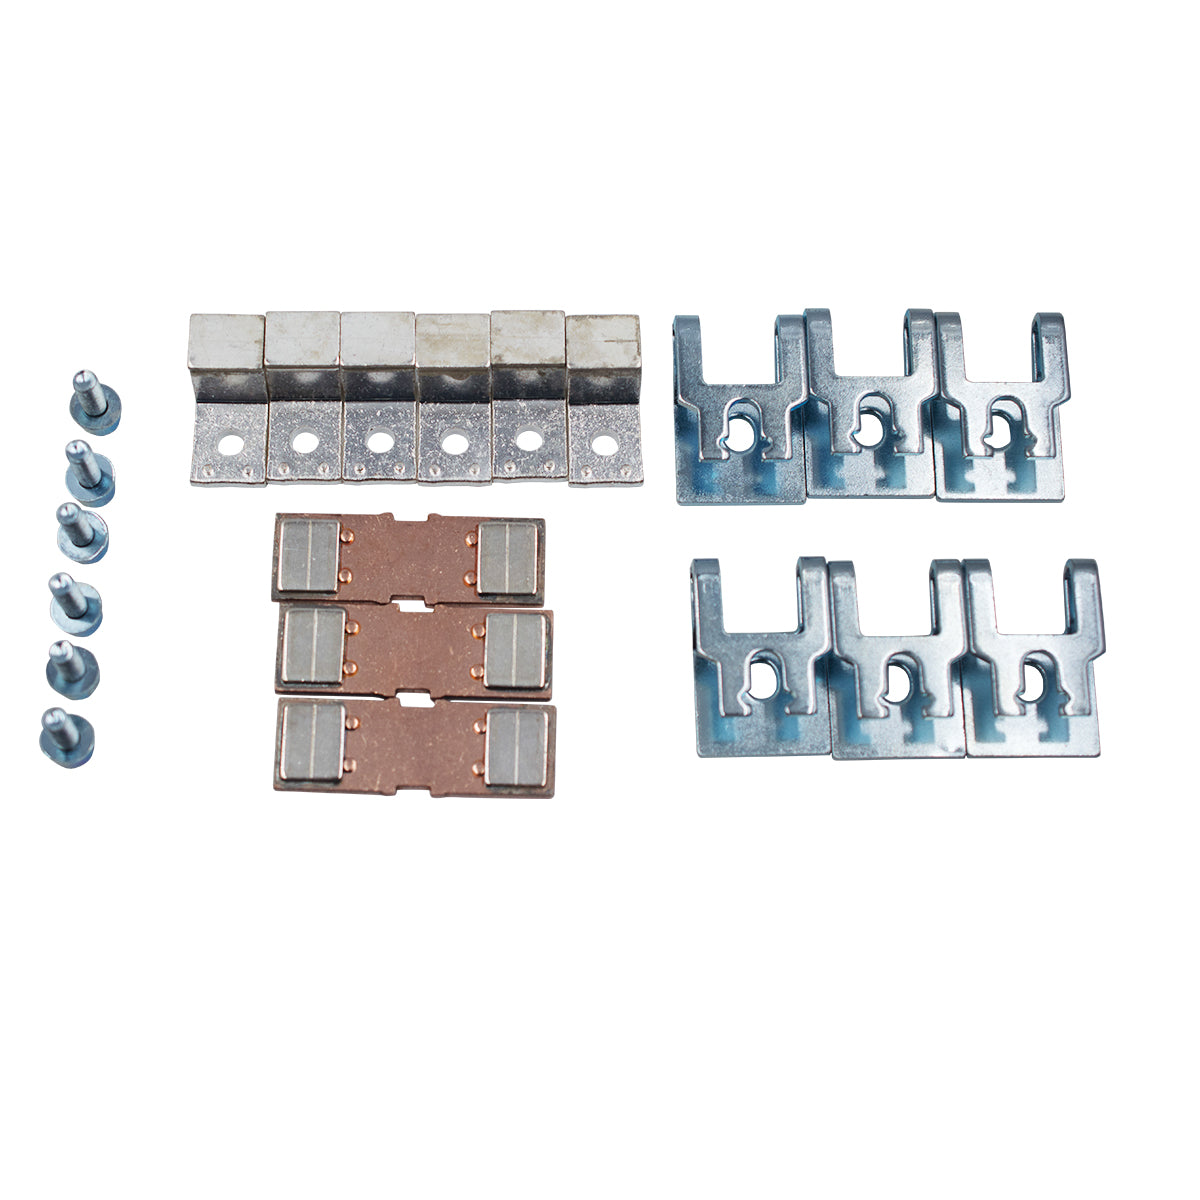 3TF Contact kits 3TY7530-0A for the Siemens 3TF53 contactor